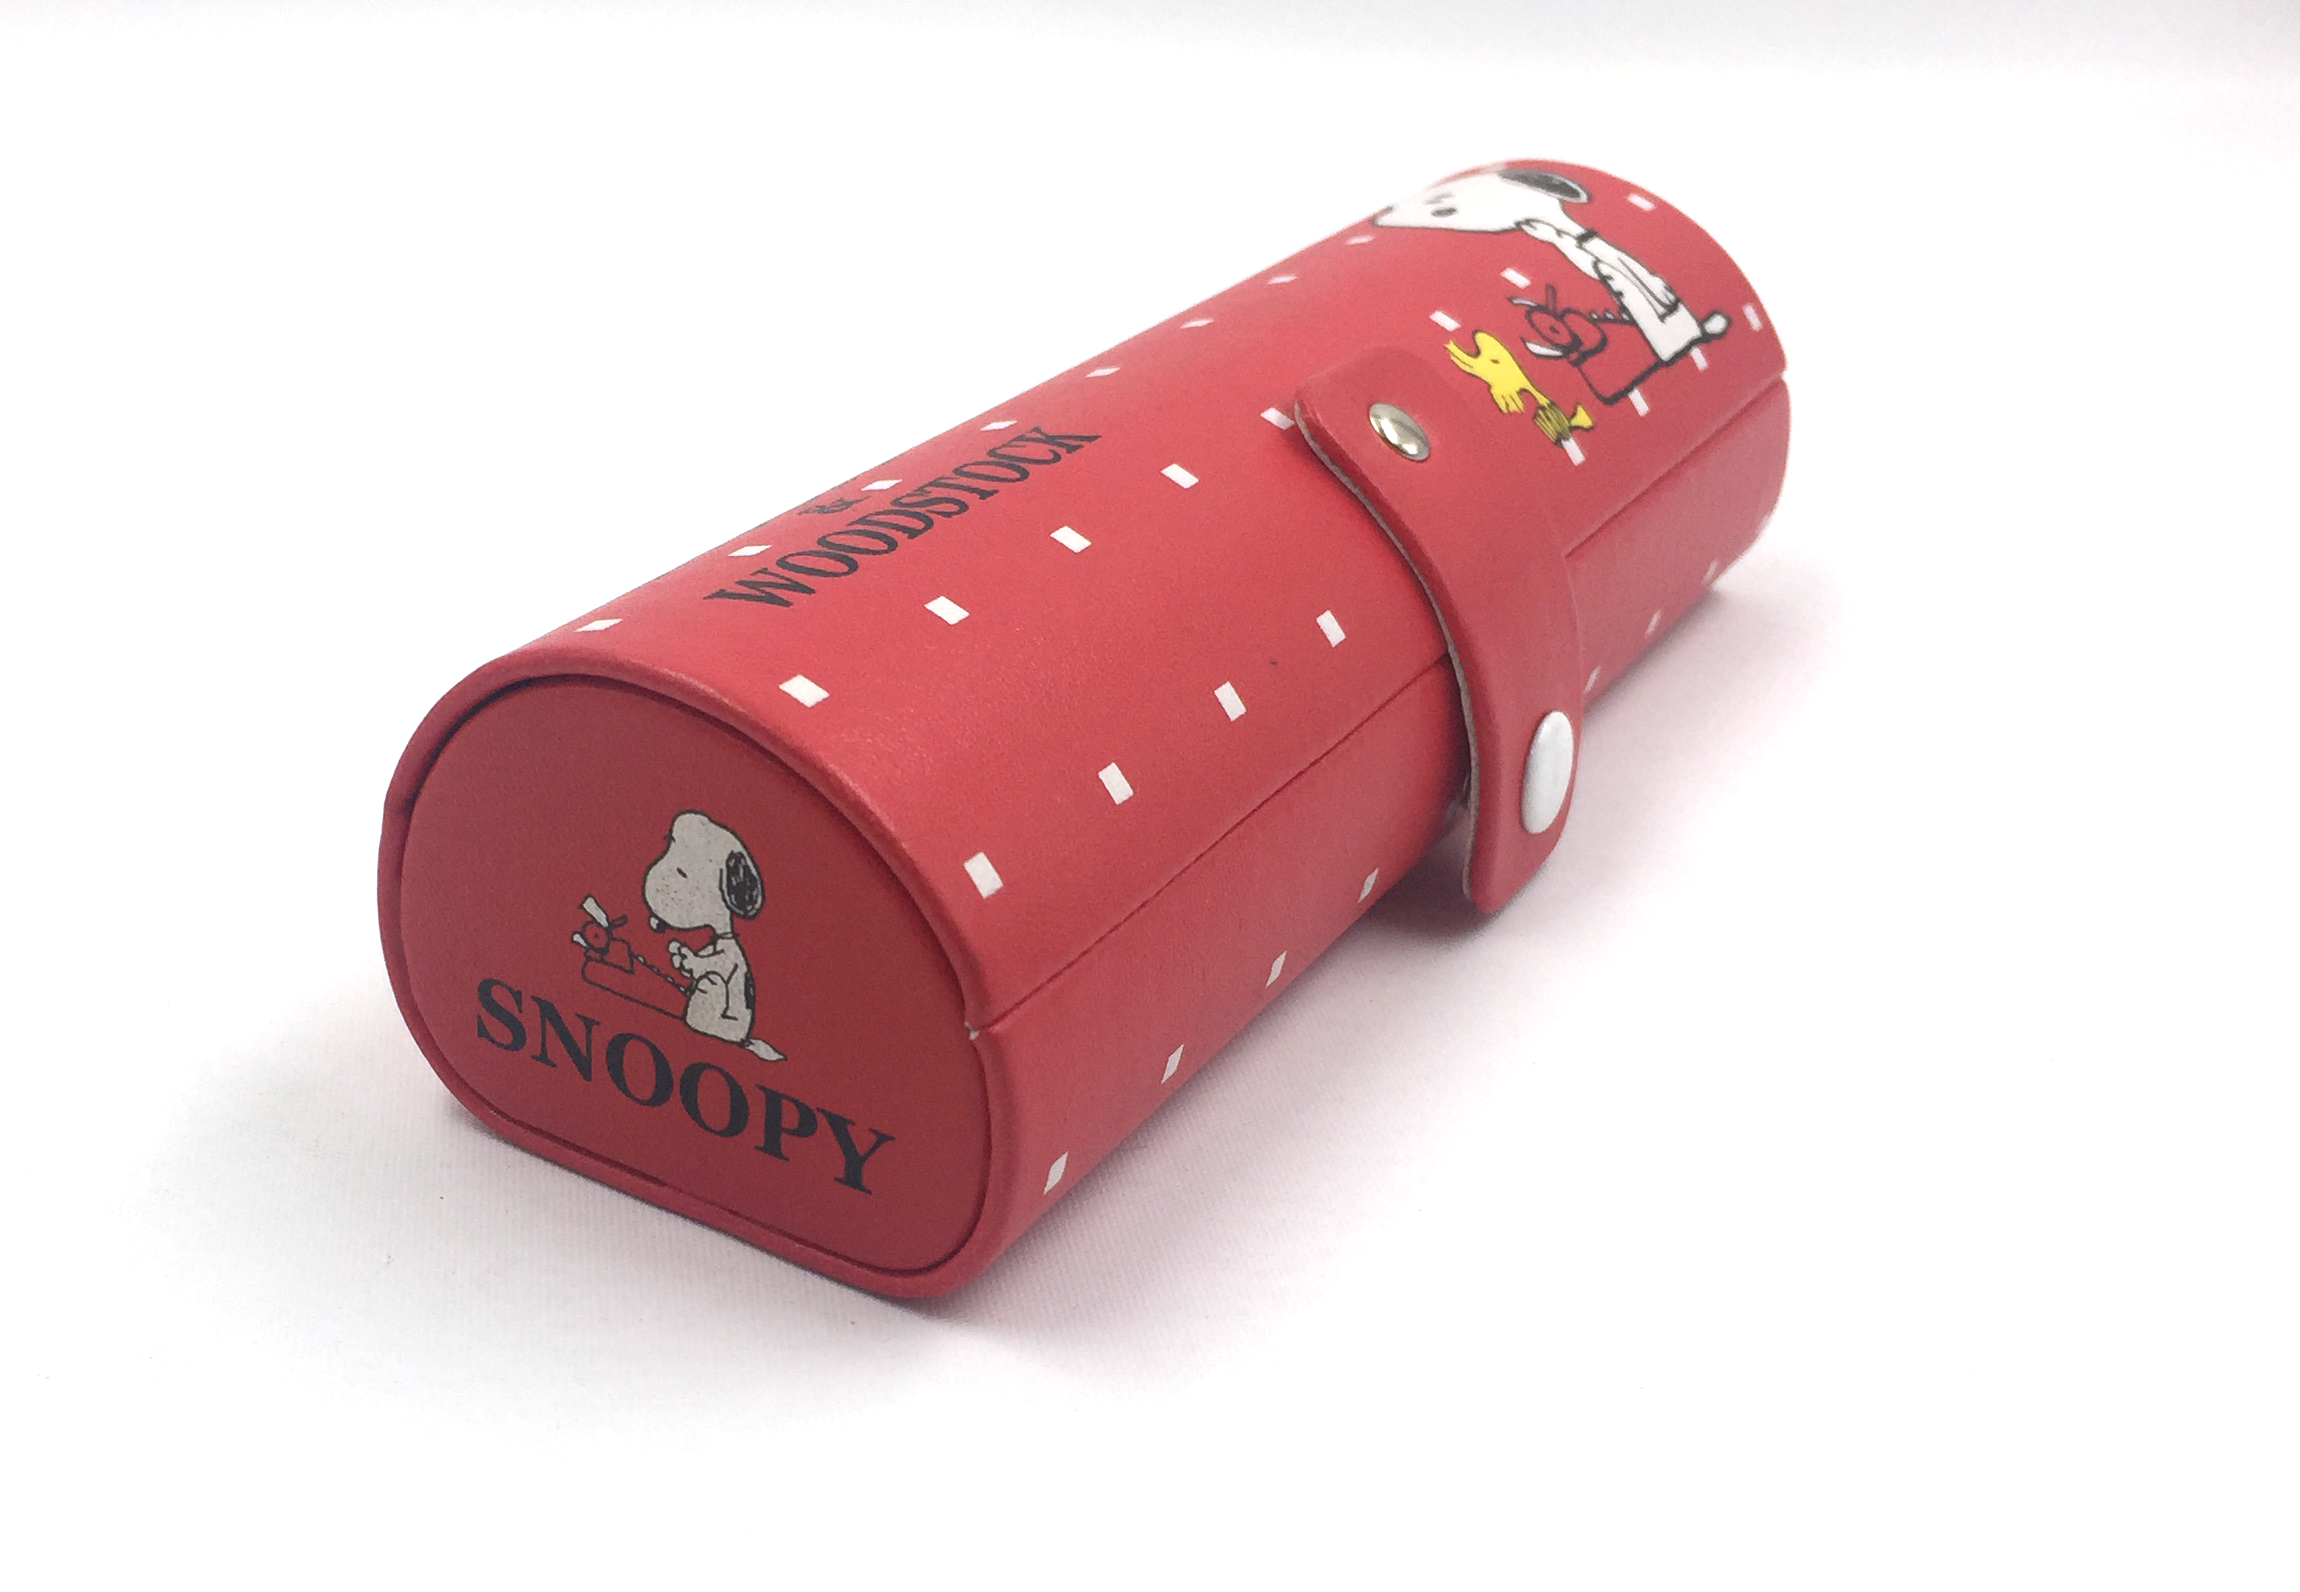 New high grade red spectacles cases manufactur for kids with SNOOPY